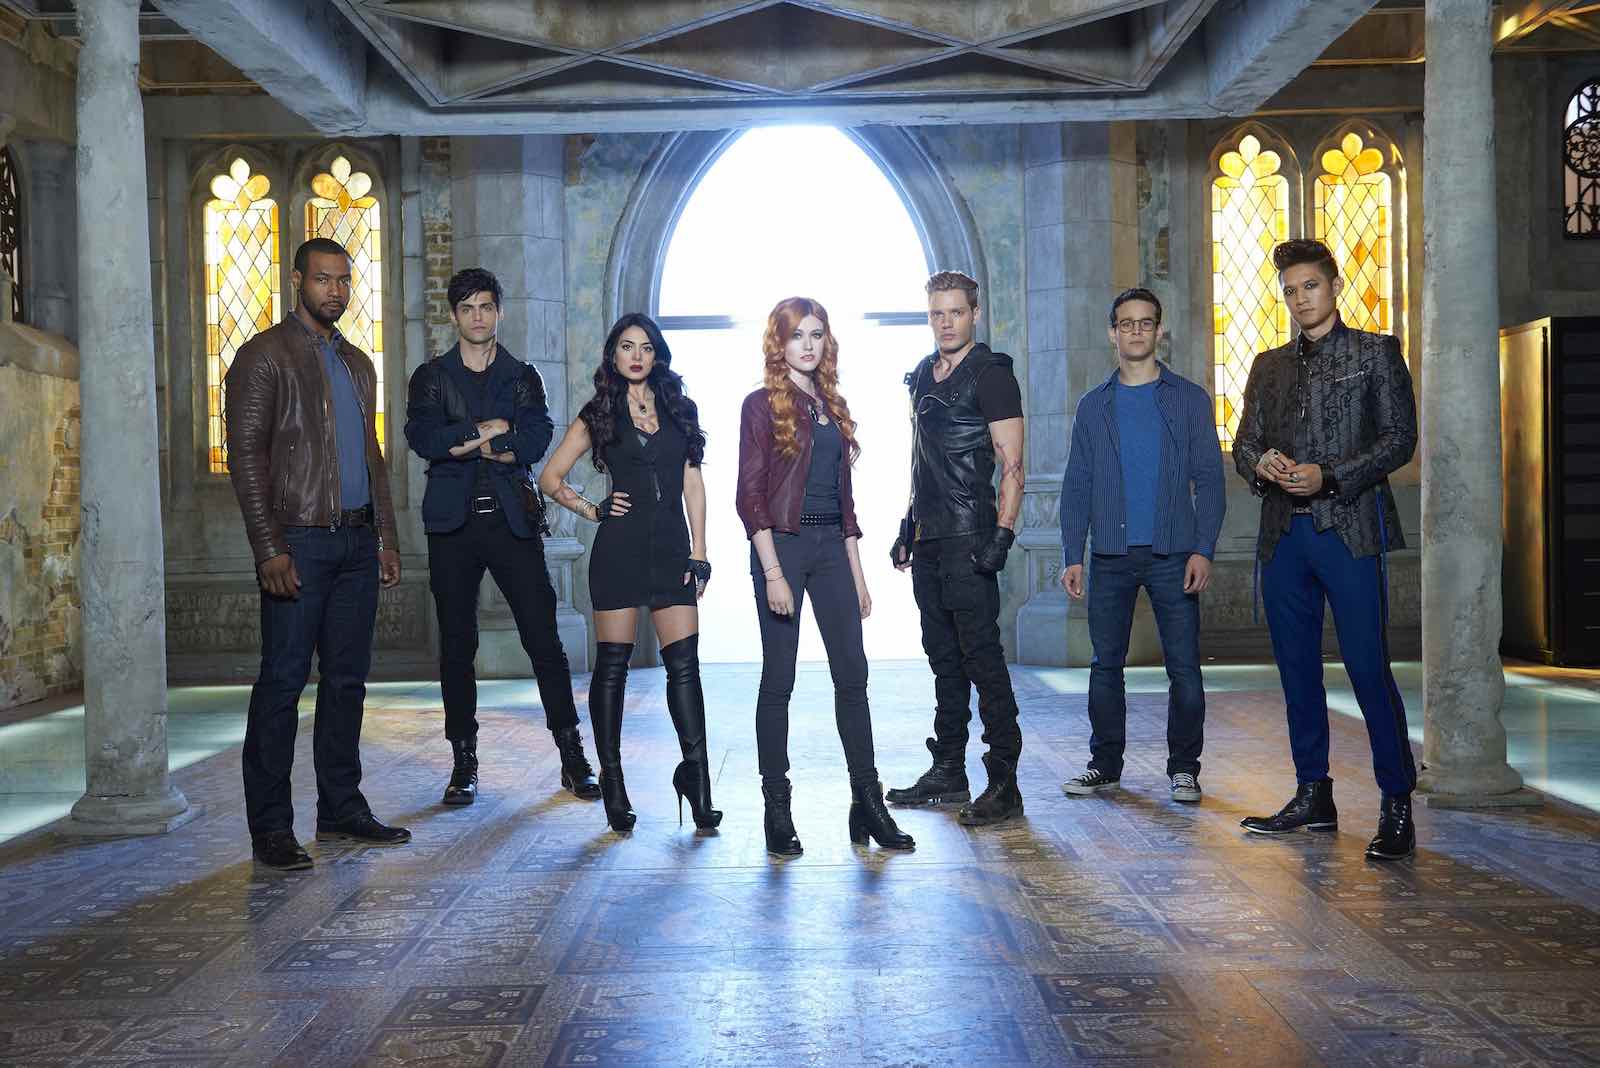 Even considering its cancellation, 'Shadowhunters' managed to nail one of the highest live/same-day viewership figures for the finale. #SaveShadowhunters!